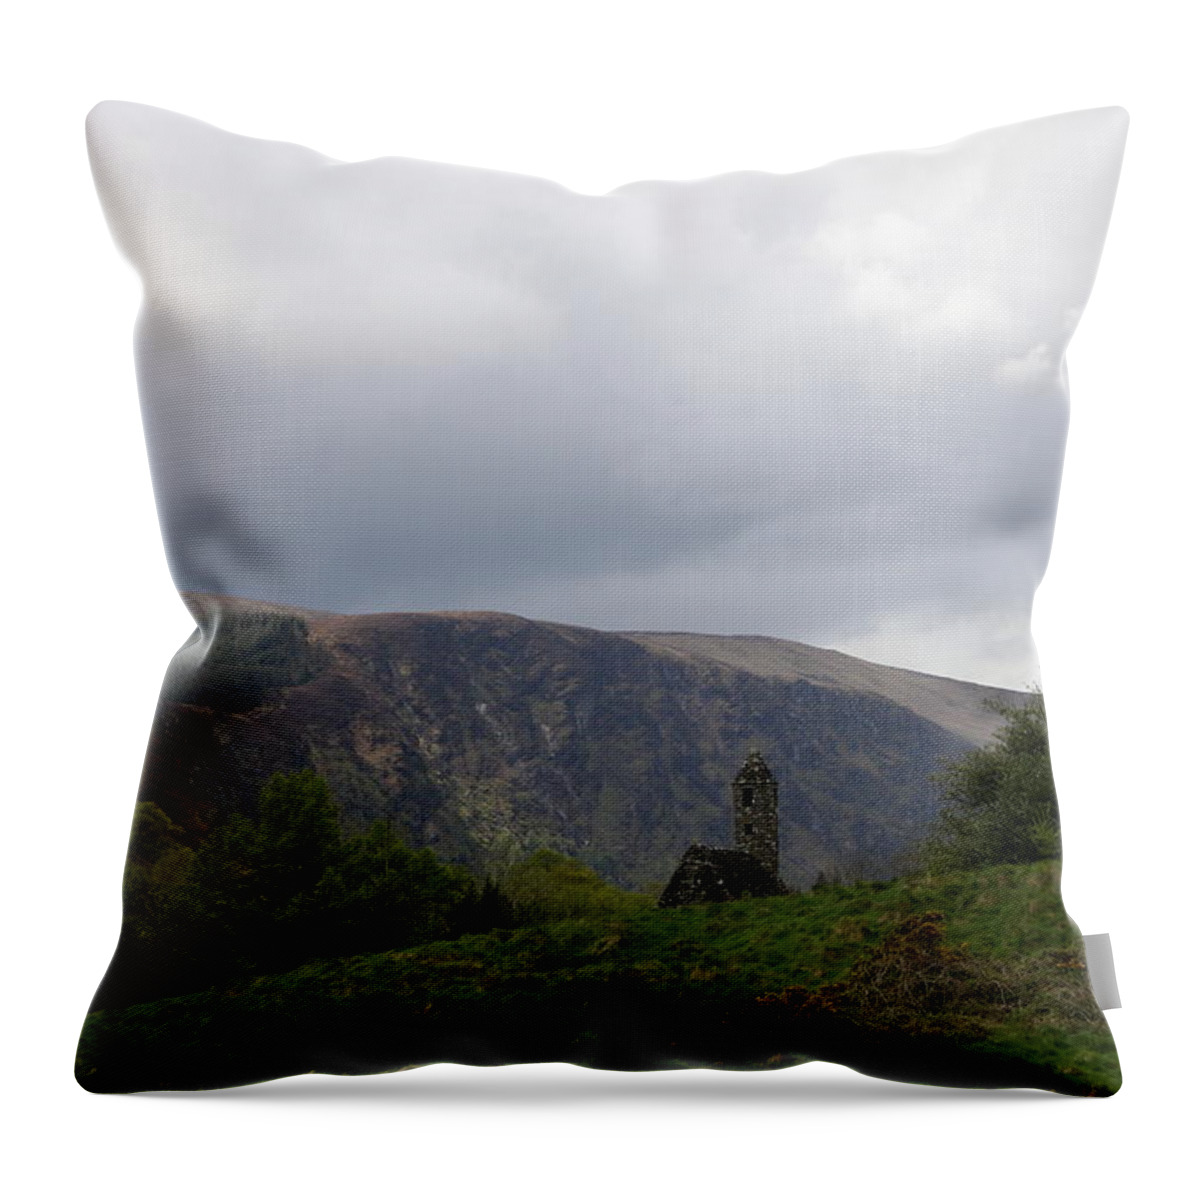 Ruin Throw Pillow featuring the photograph Ruin In the Hills - Glendalough by Christiane Schulze Art And Photography